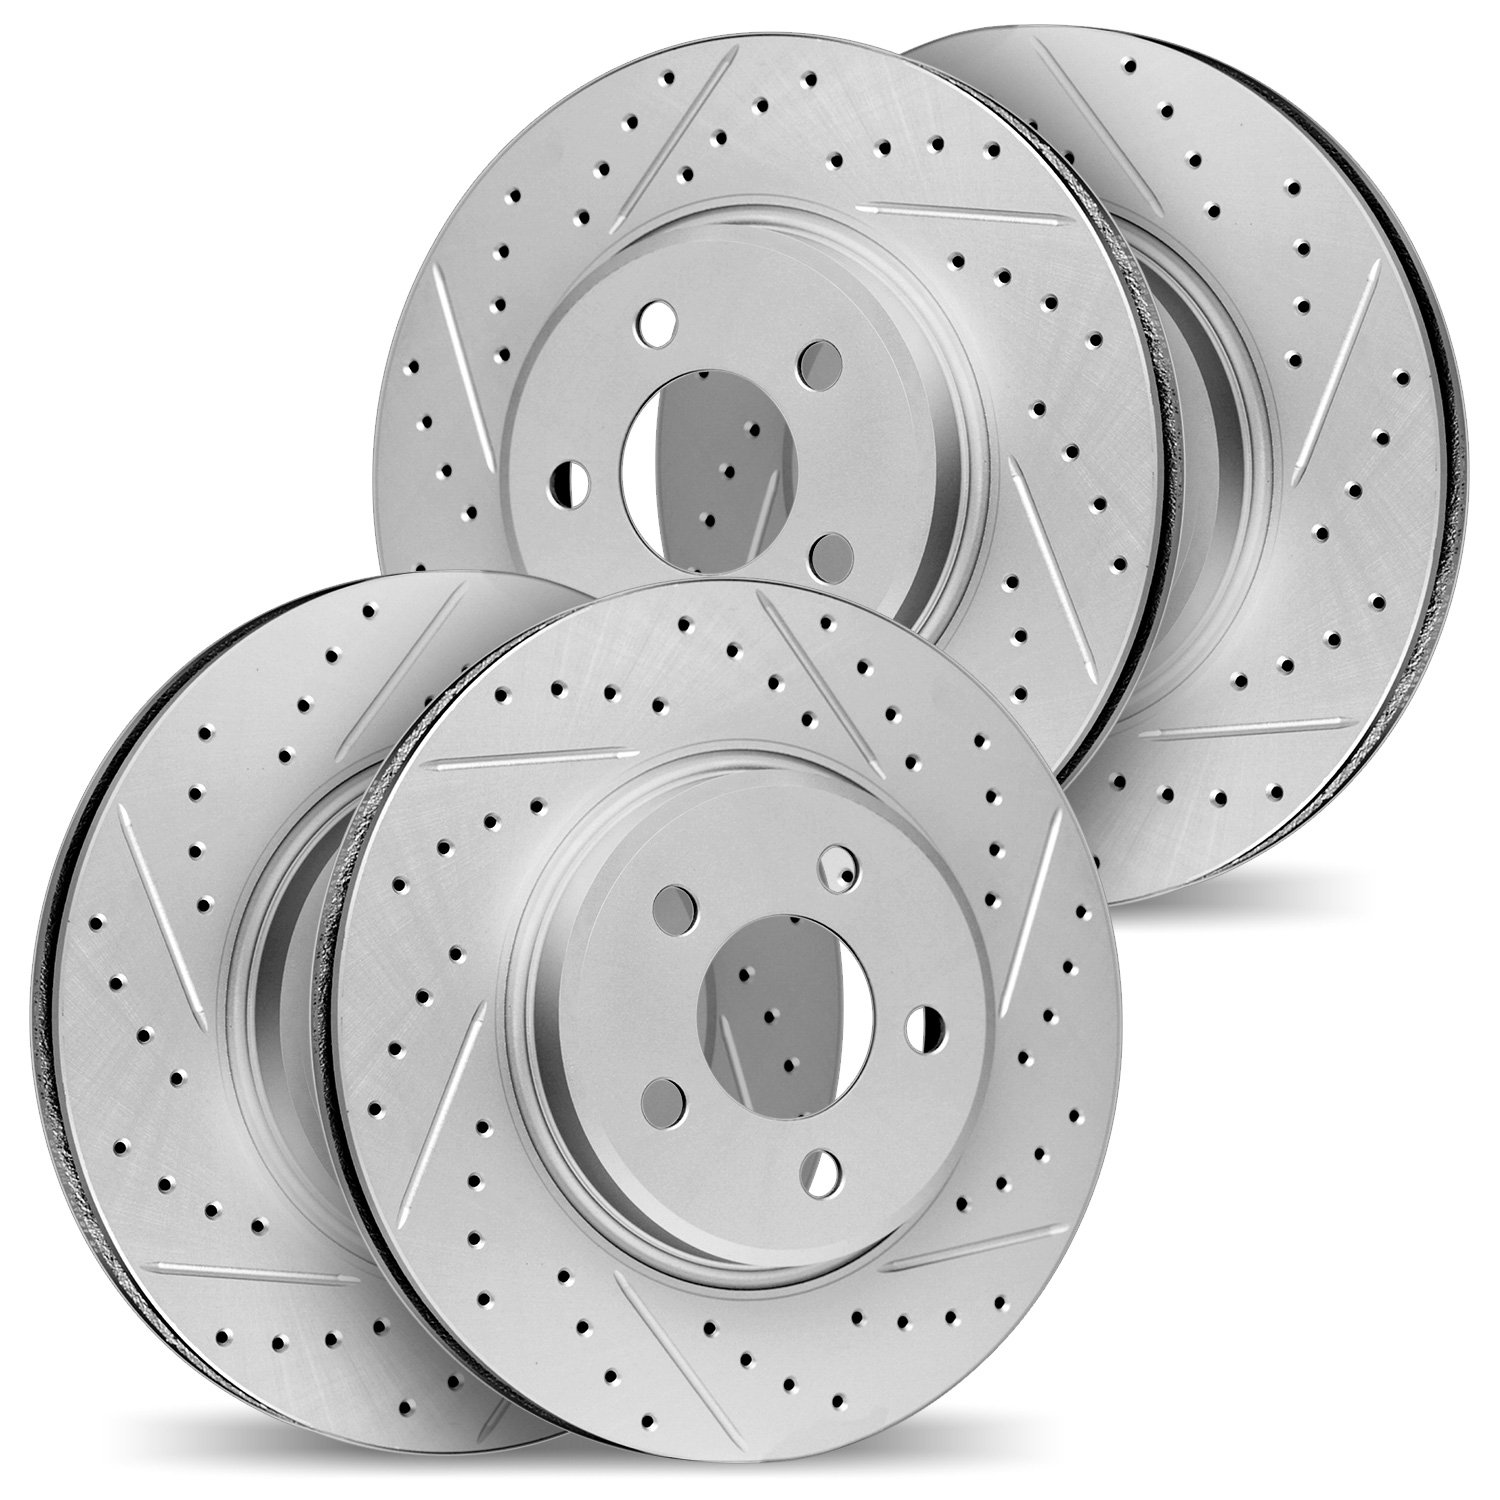 2004-74011 Geoperformance Drilled/Slotted Brake Rotors, 2004-2006 Audi/Volkswagen, Position: Front and Rear